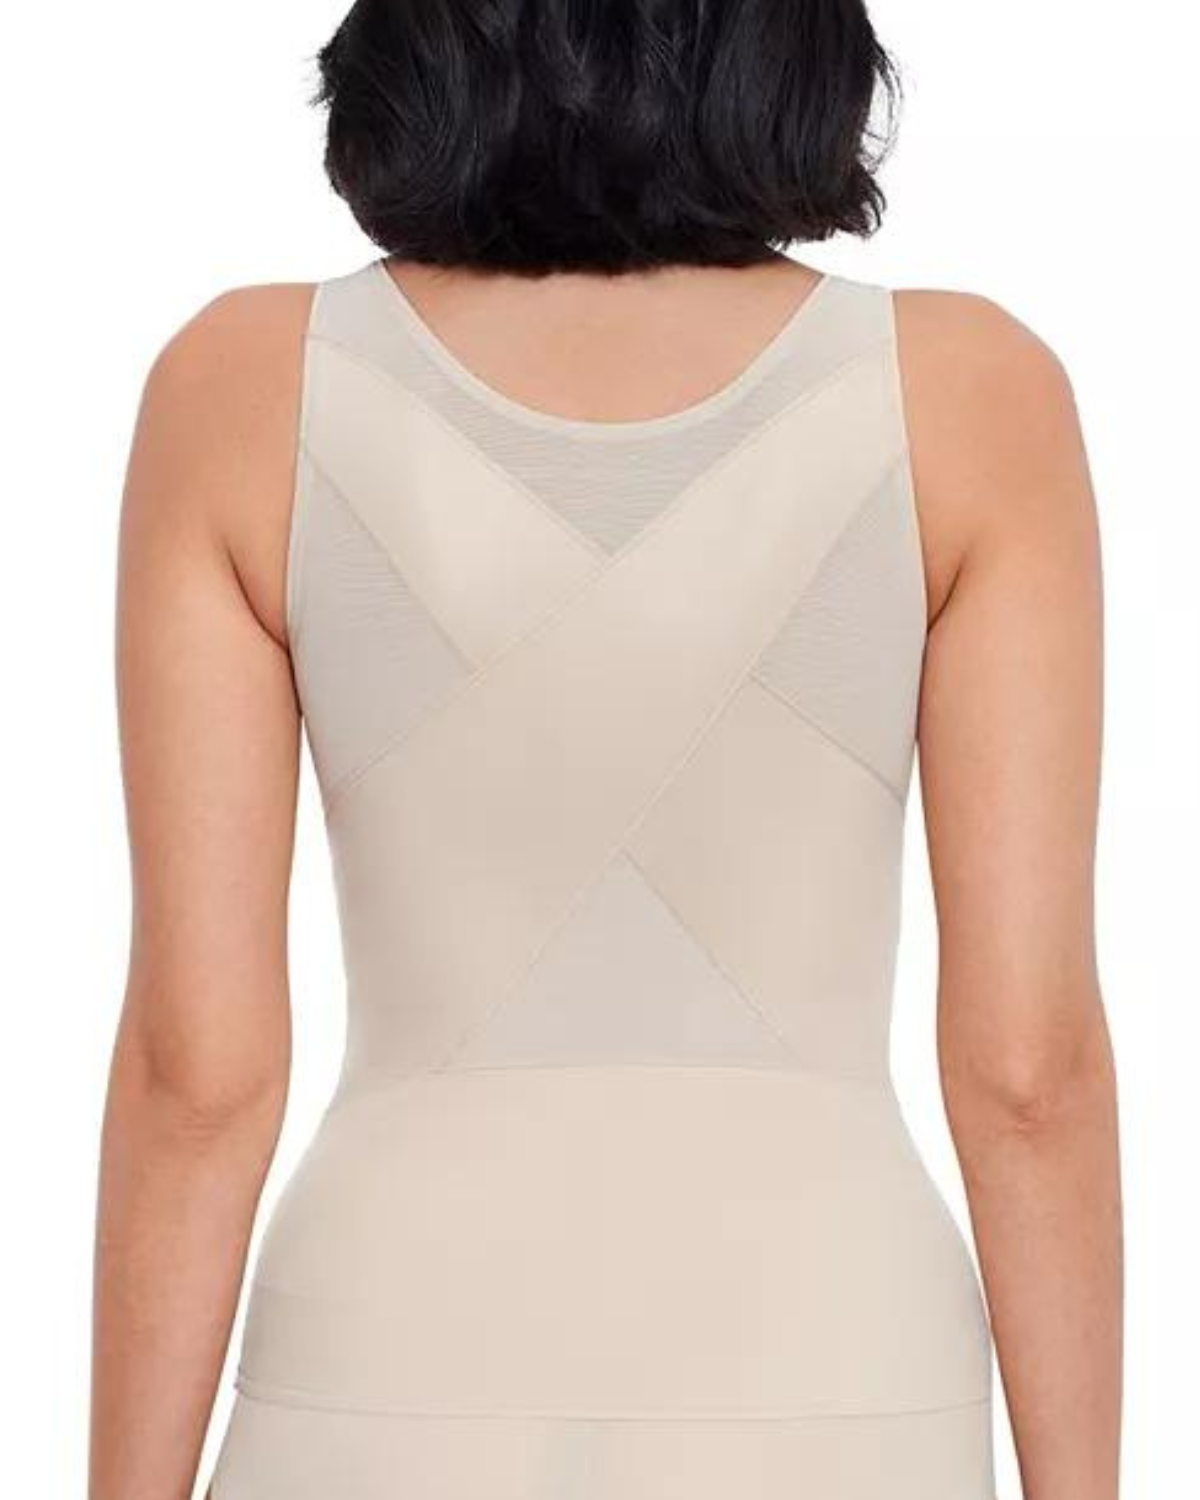 Miraclesuit Shapewear BackWrap Step-In Camisole (More colors available) - 2433